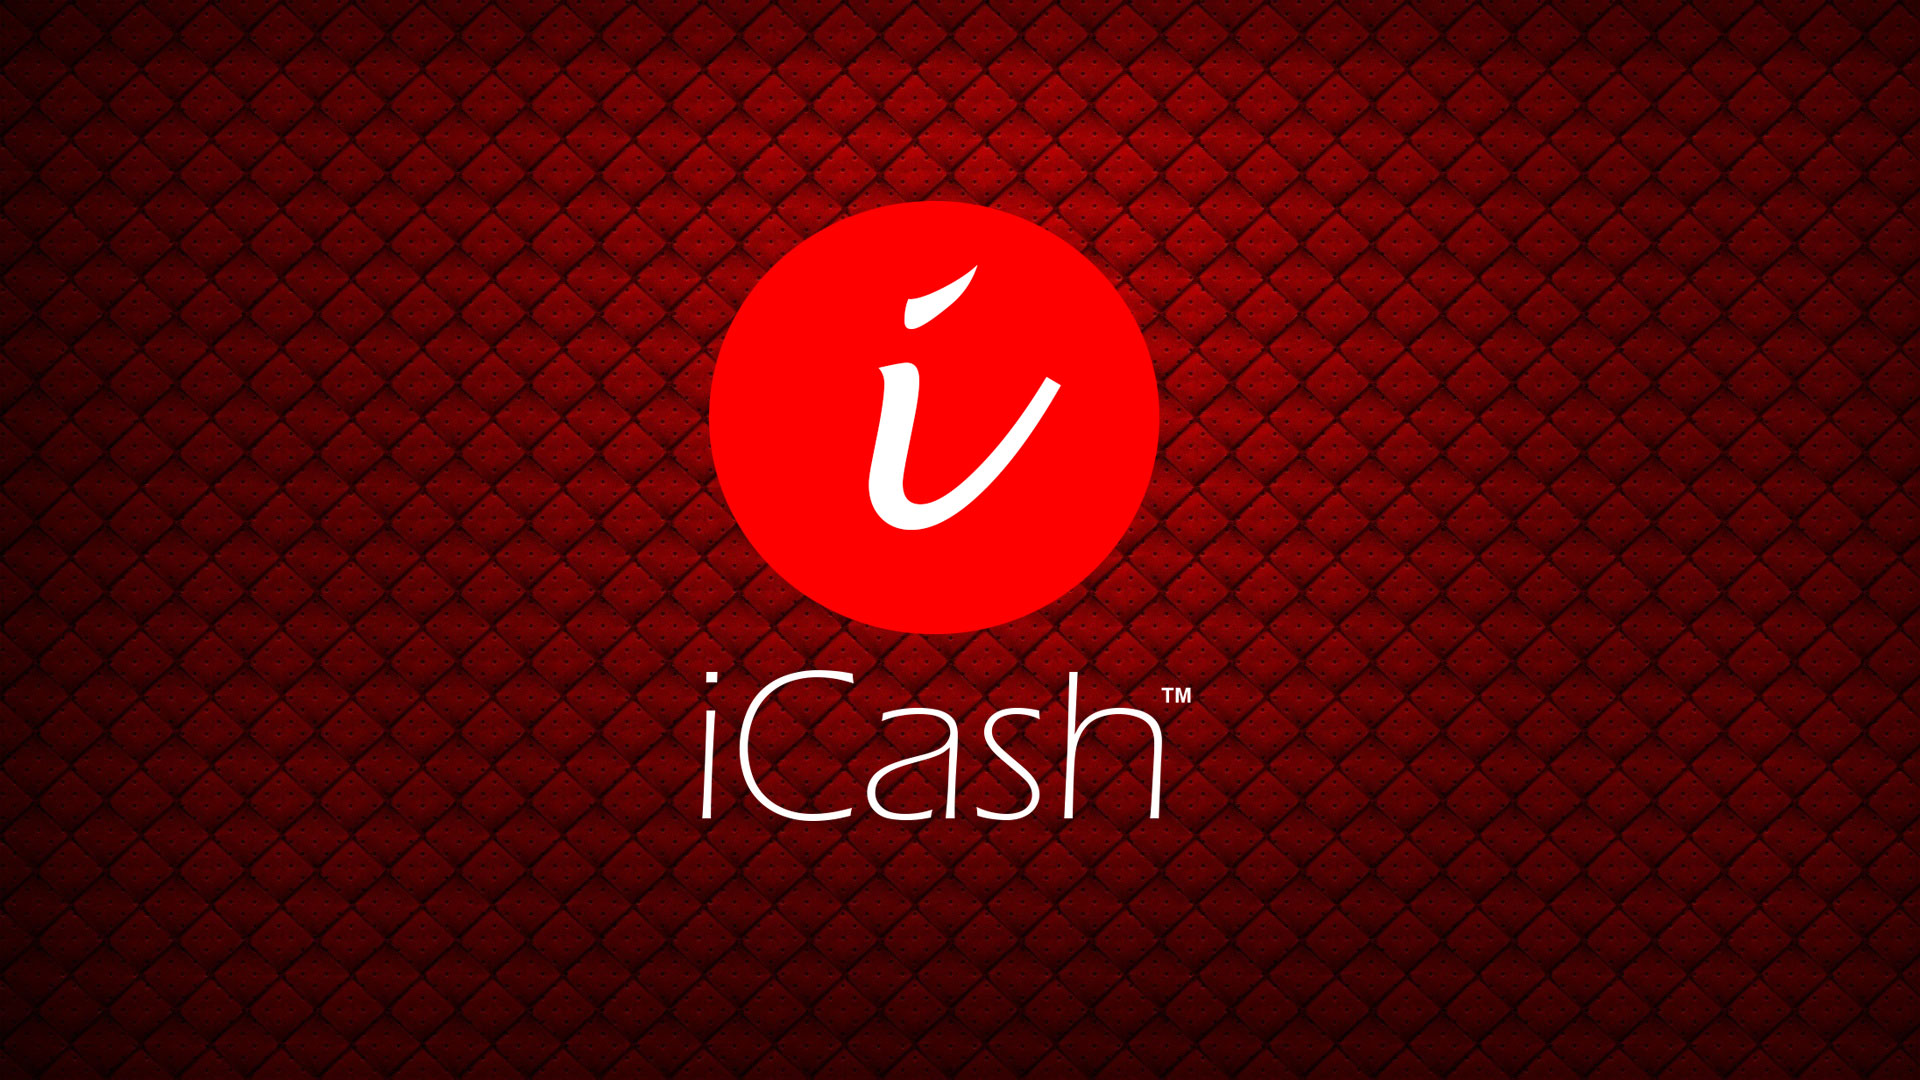 icash wallpapers